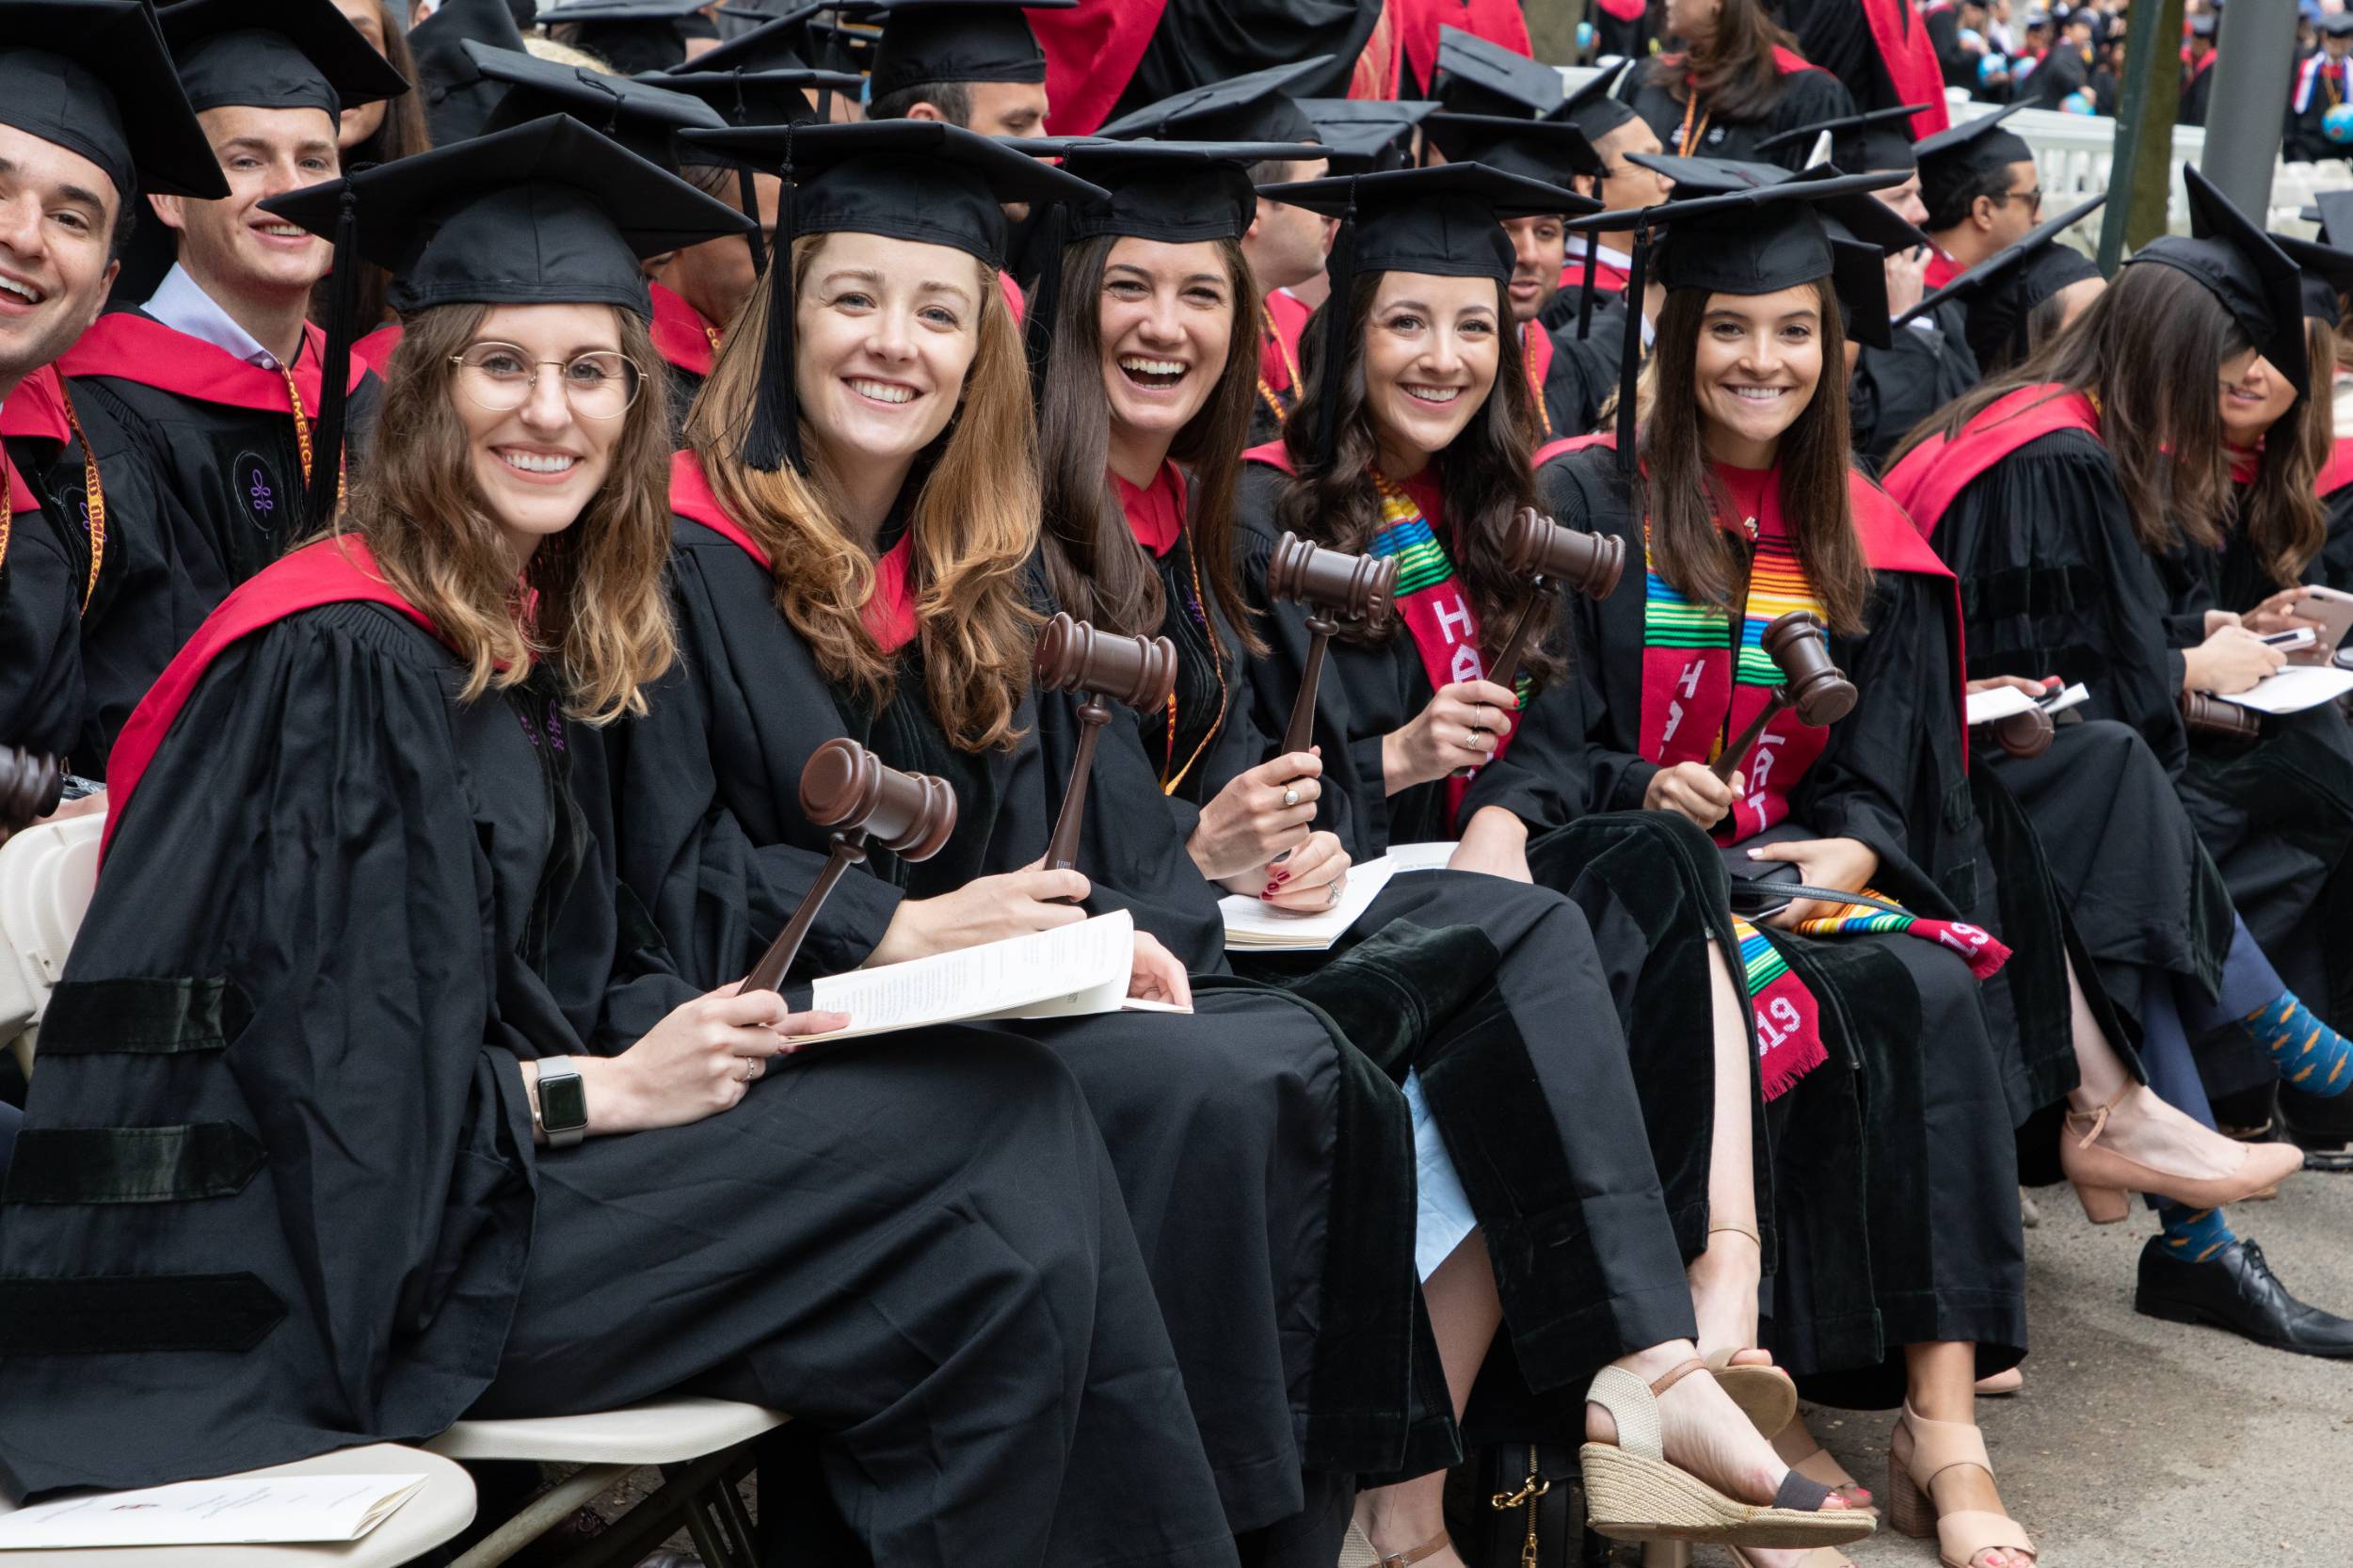 Several graduates in caps and gowns smile together holding HLS gavels